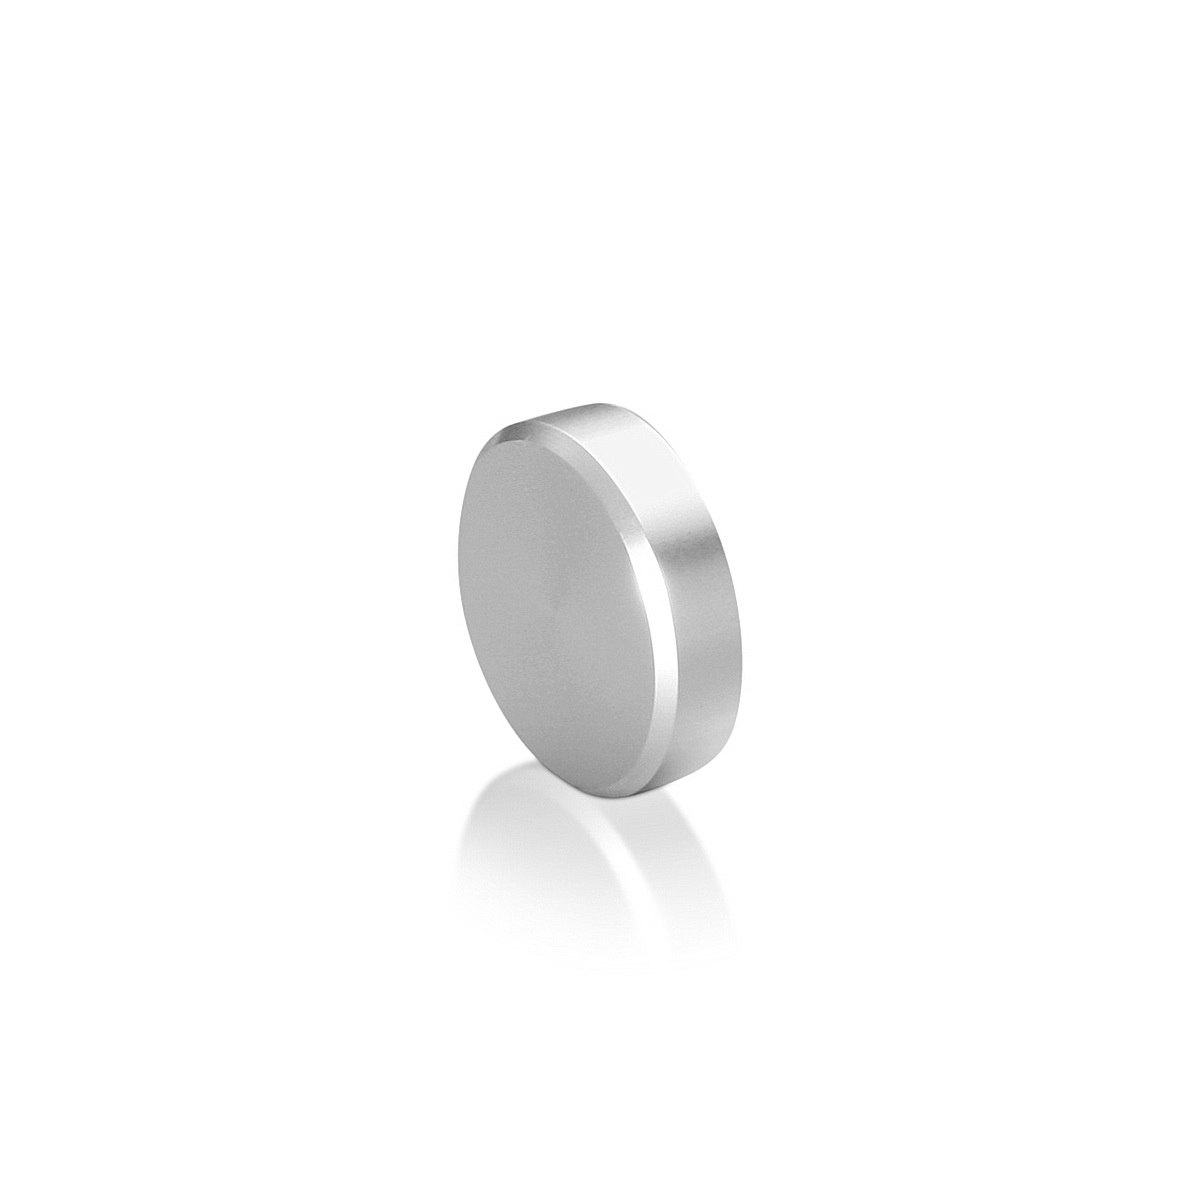 1/4-20 Threaded Caps Diameter: 1'', Height: 1/4'', Clear Anodized Aluminum [Required Material Hole Size: 5/16'']